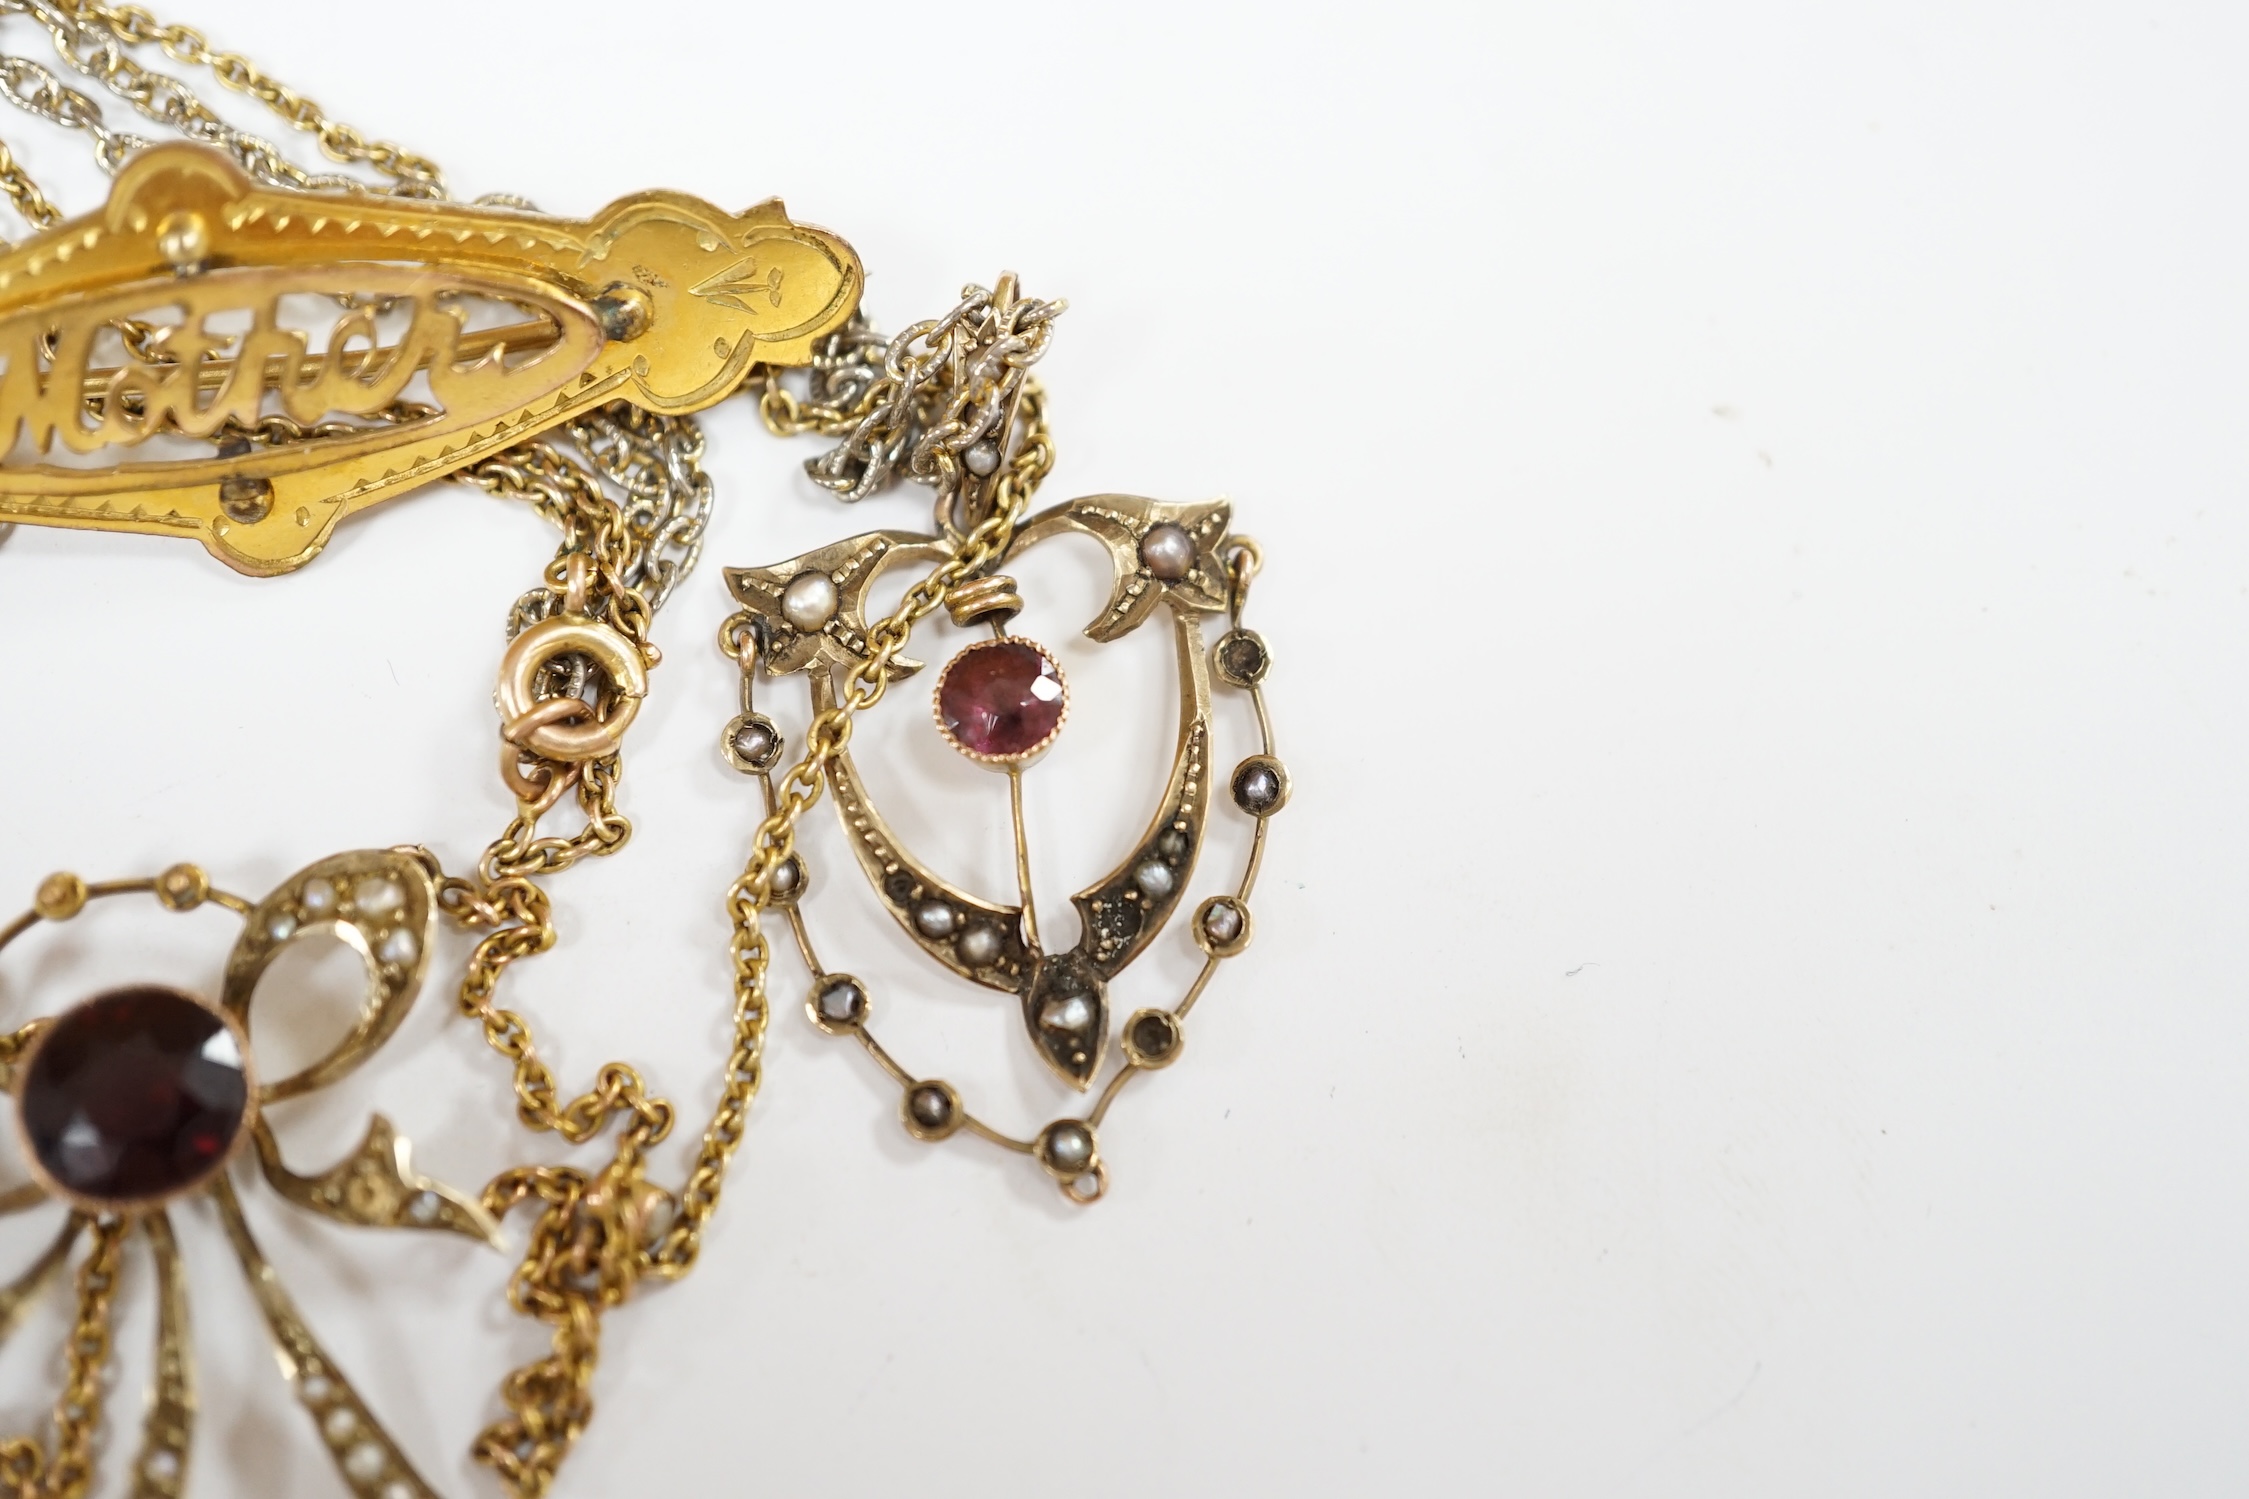 An early 20th century 9ct, garnet and seed pearl set pendant necklace, 43cm, one other similar 9ct and gem set pendant, on a gilt metal chain and a yellow 'metal 'mother' brooch. Condition - fair